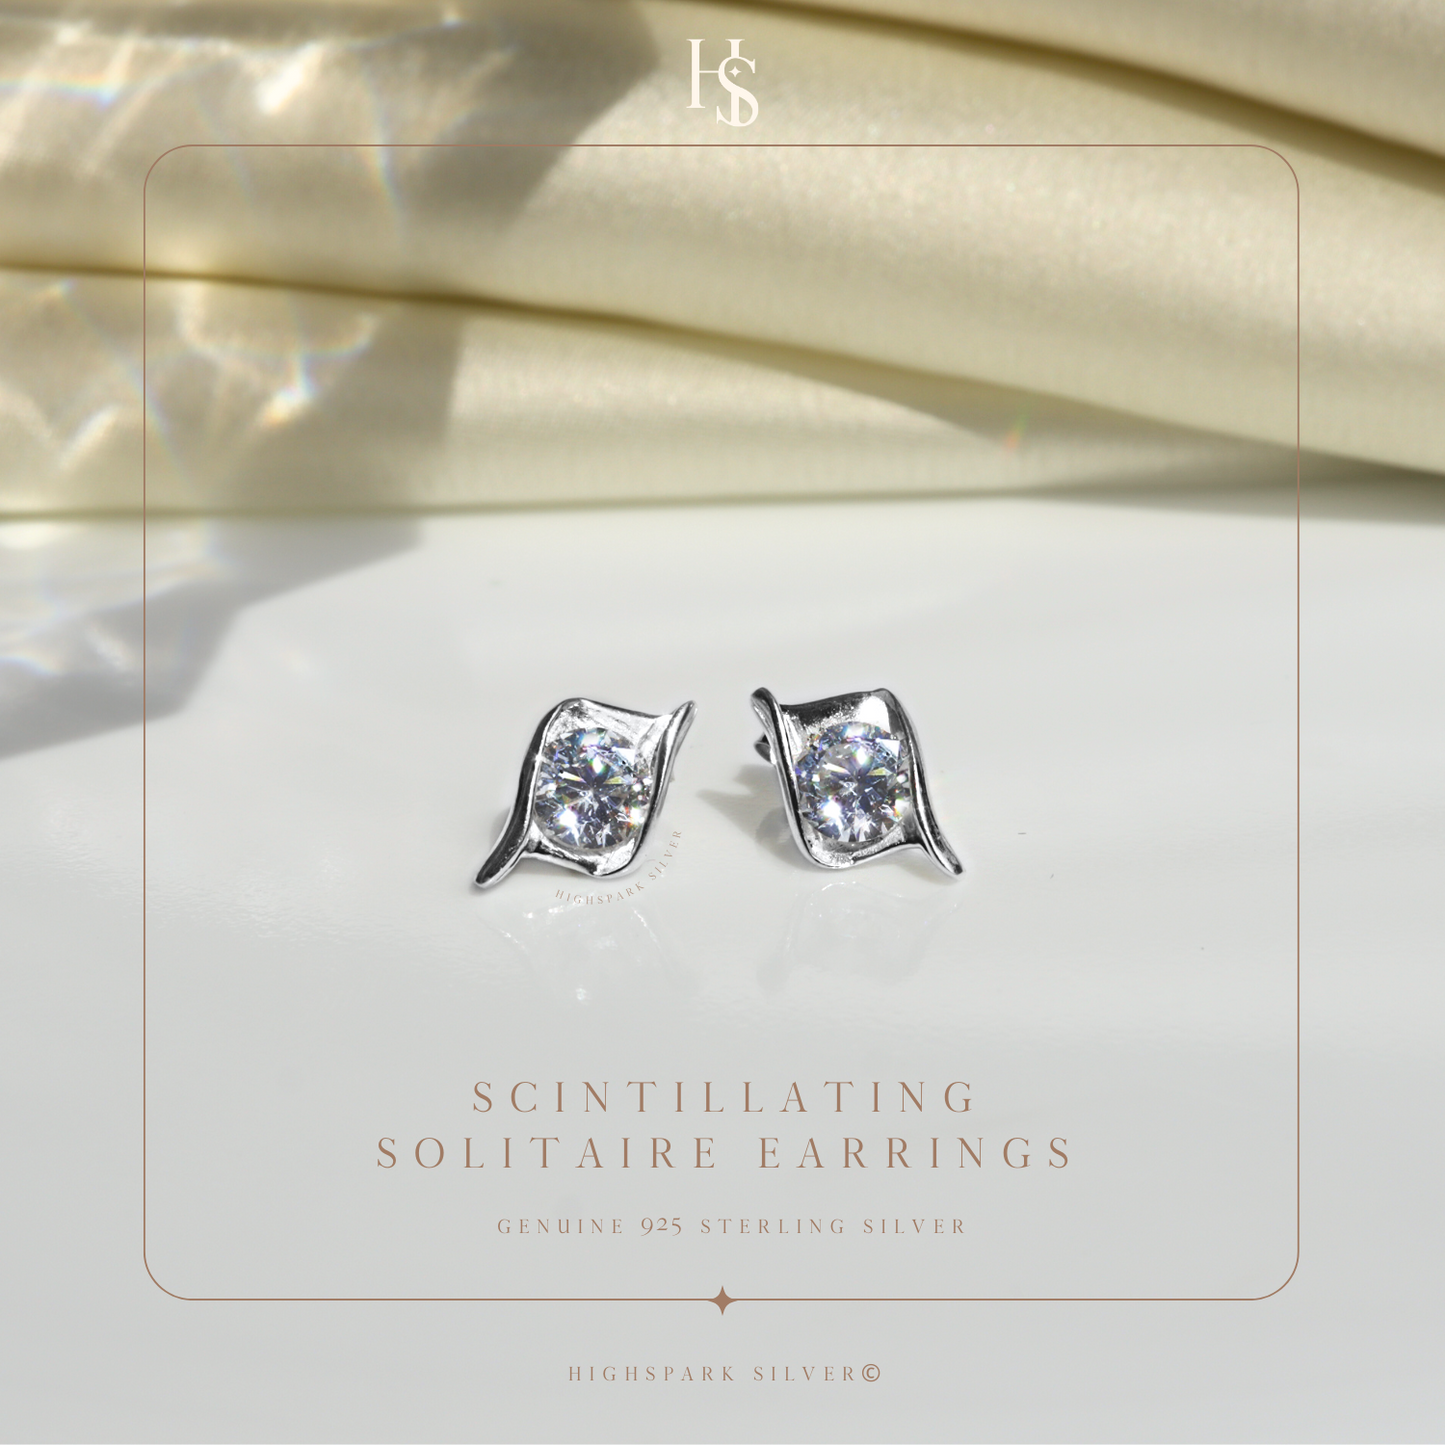 Designer Solitaire Earrings in 92.5 Silver embellished with Diamond Zirconia